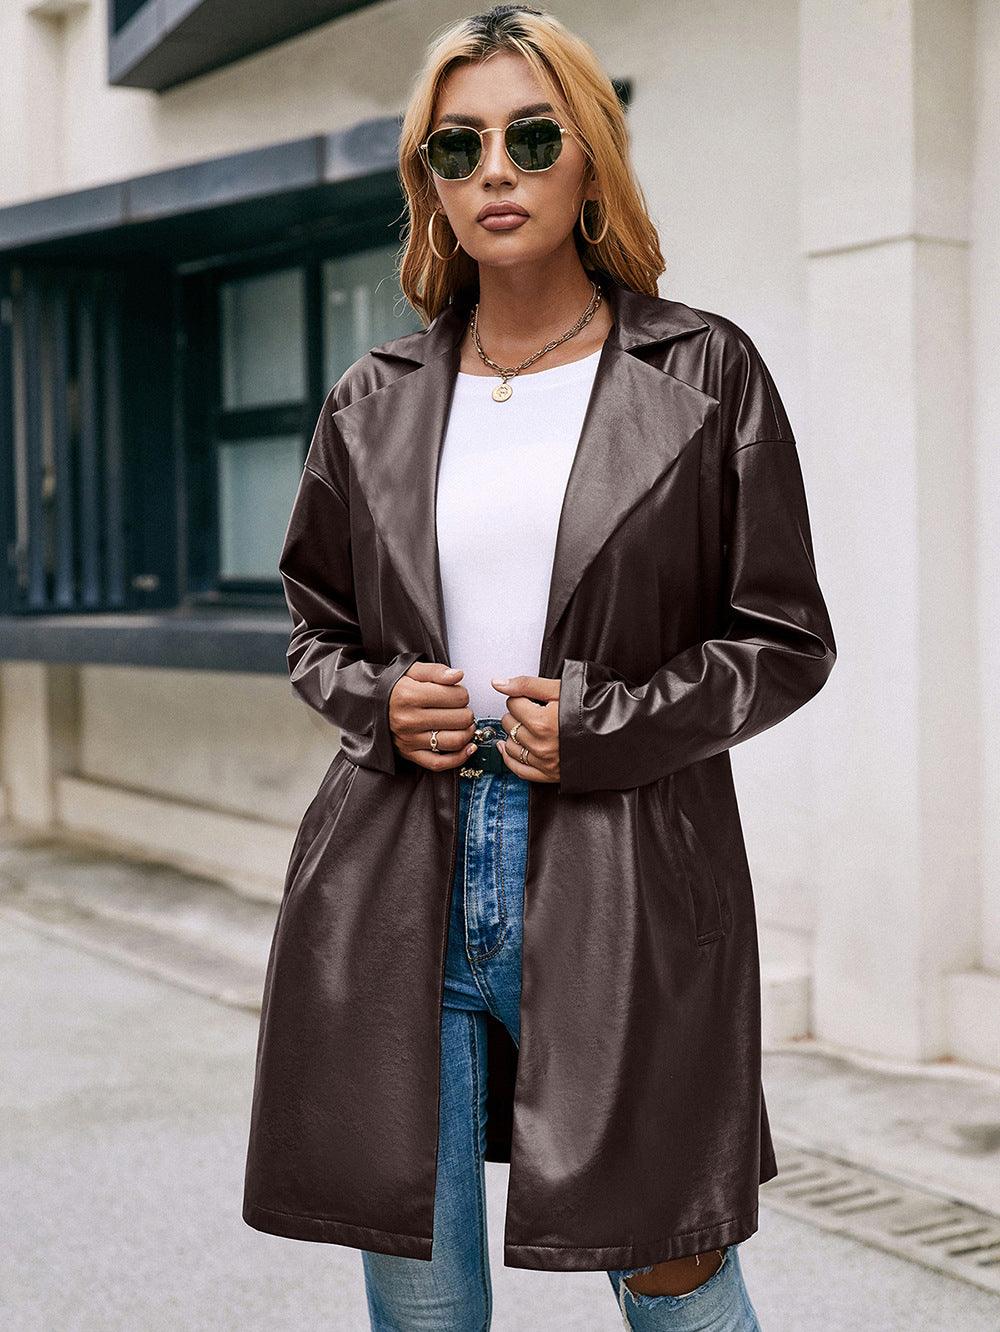 Western-inspired Elegance: Mid-Length Leather Trench Coat with Slim Silhouette and Long Sleeves - Your-Look